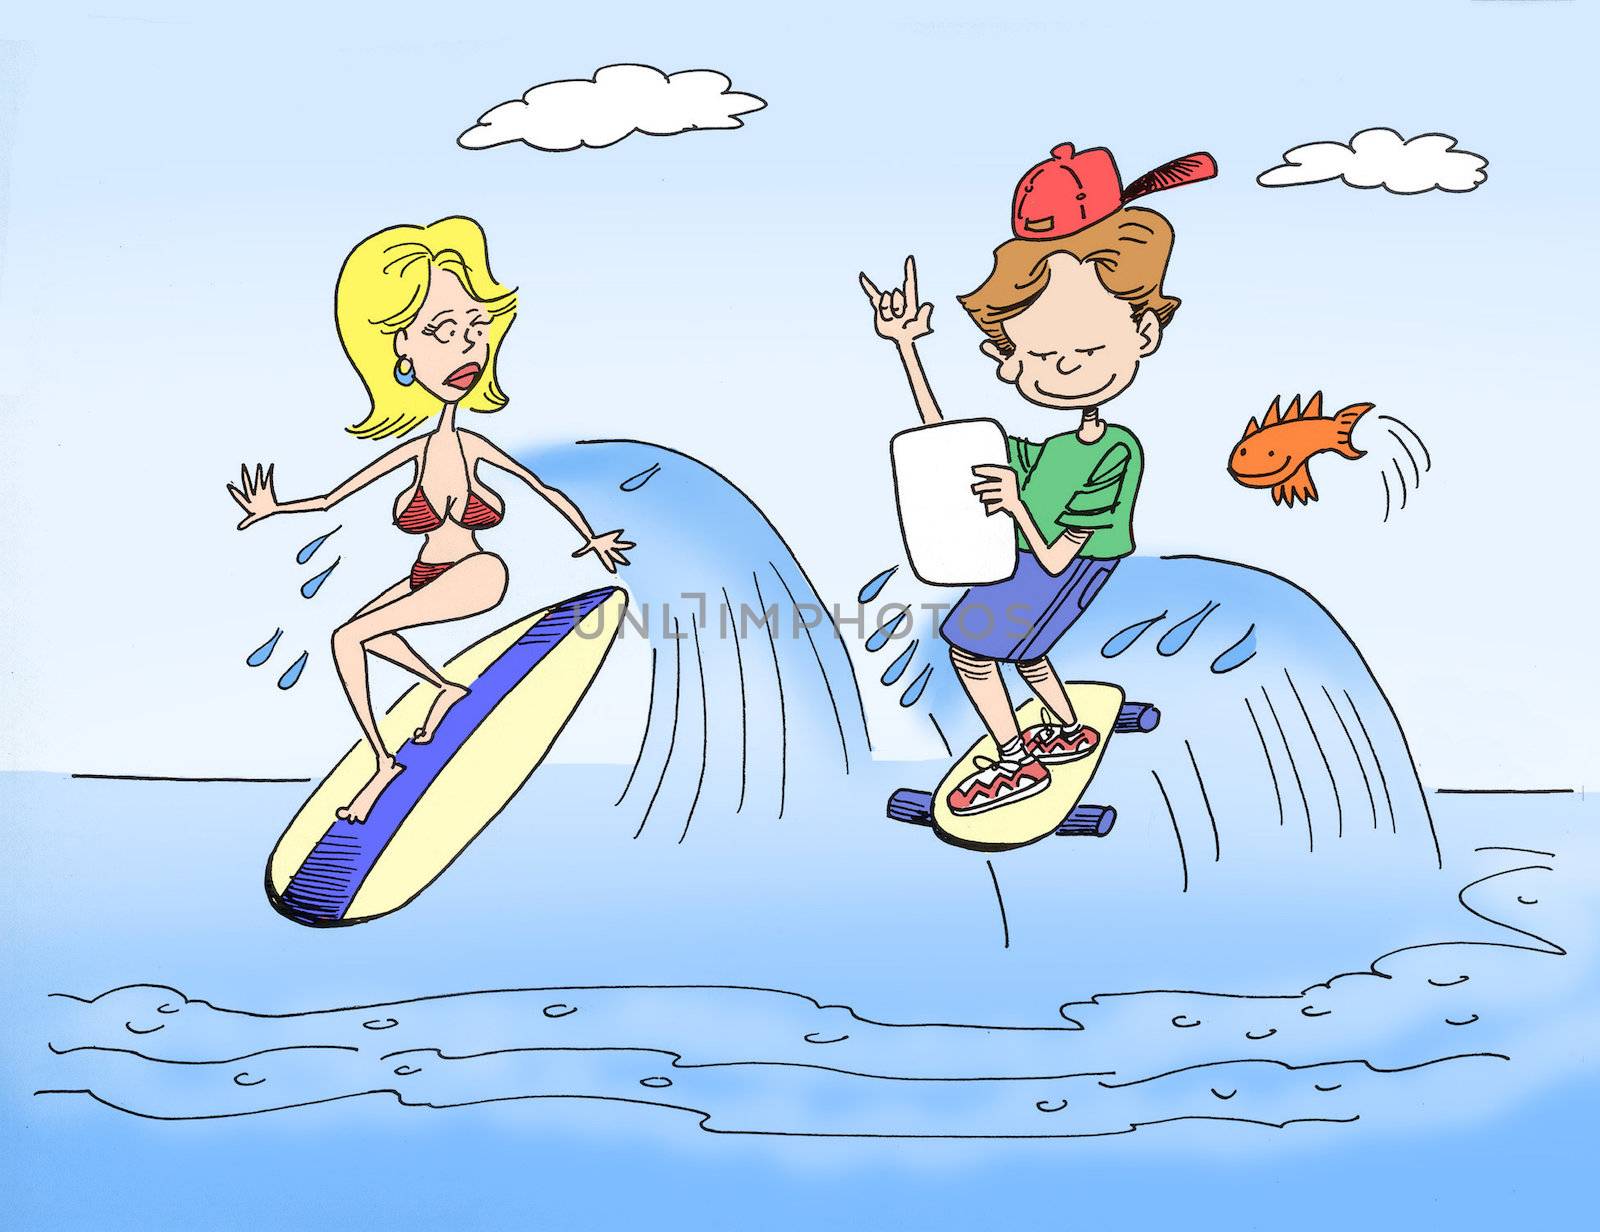 Surfing the internet (while surfing the ocean)